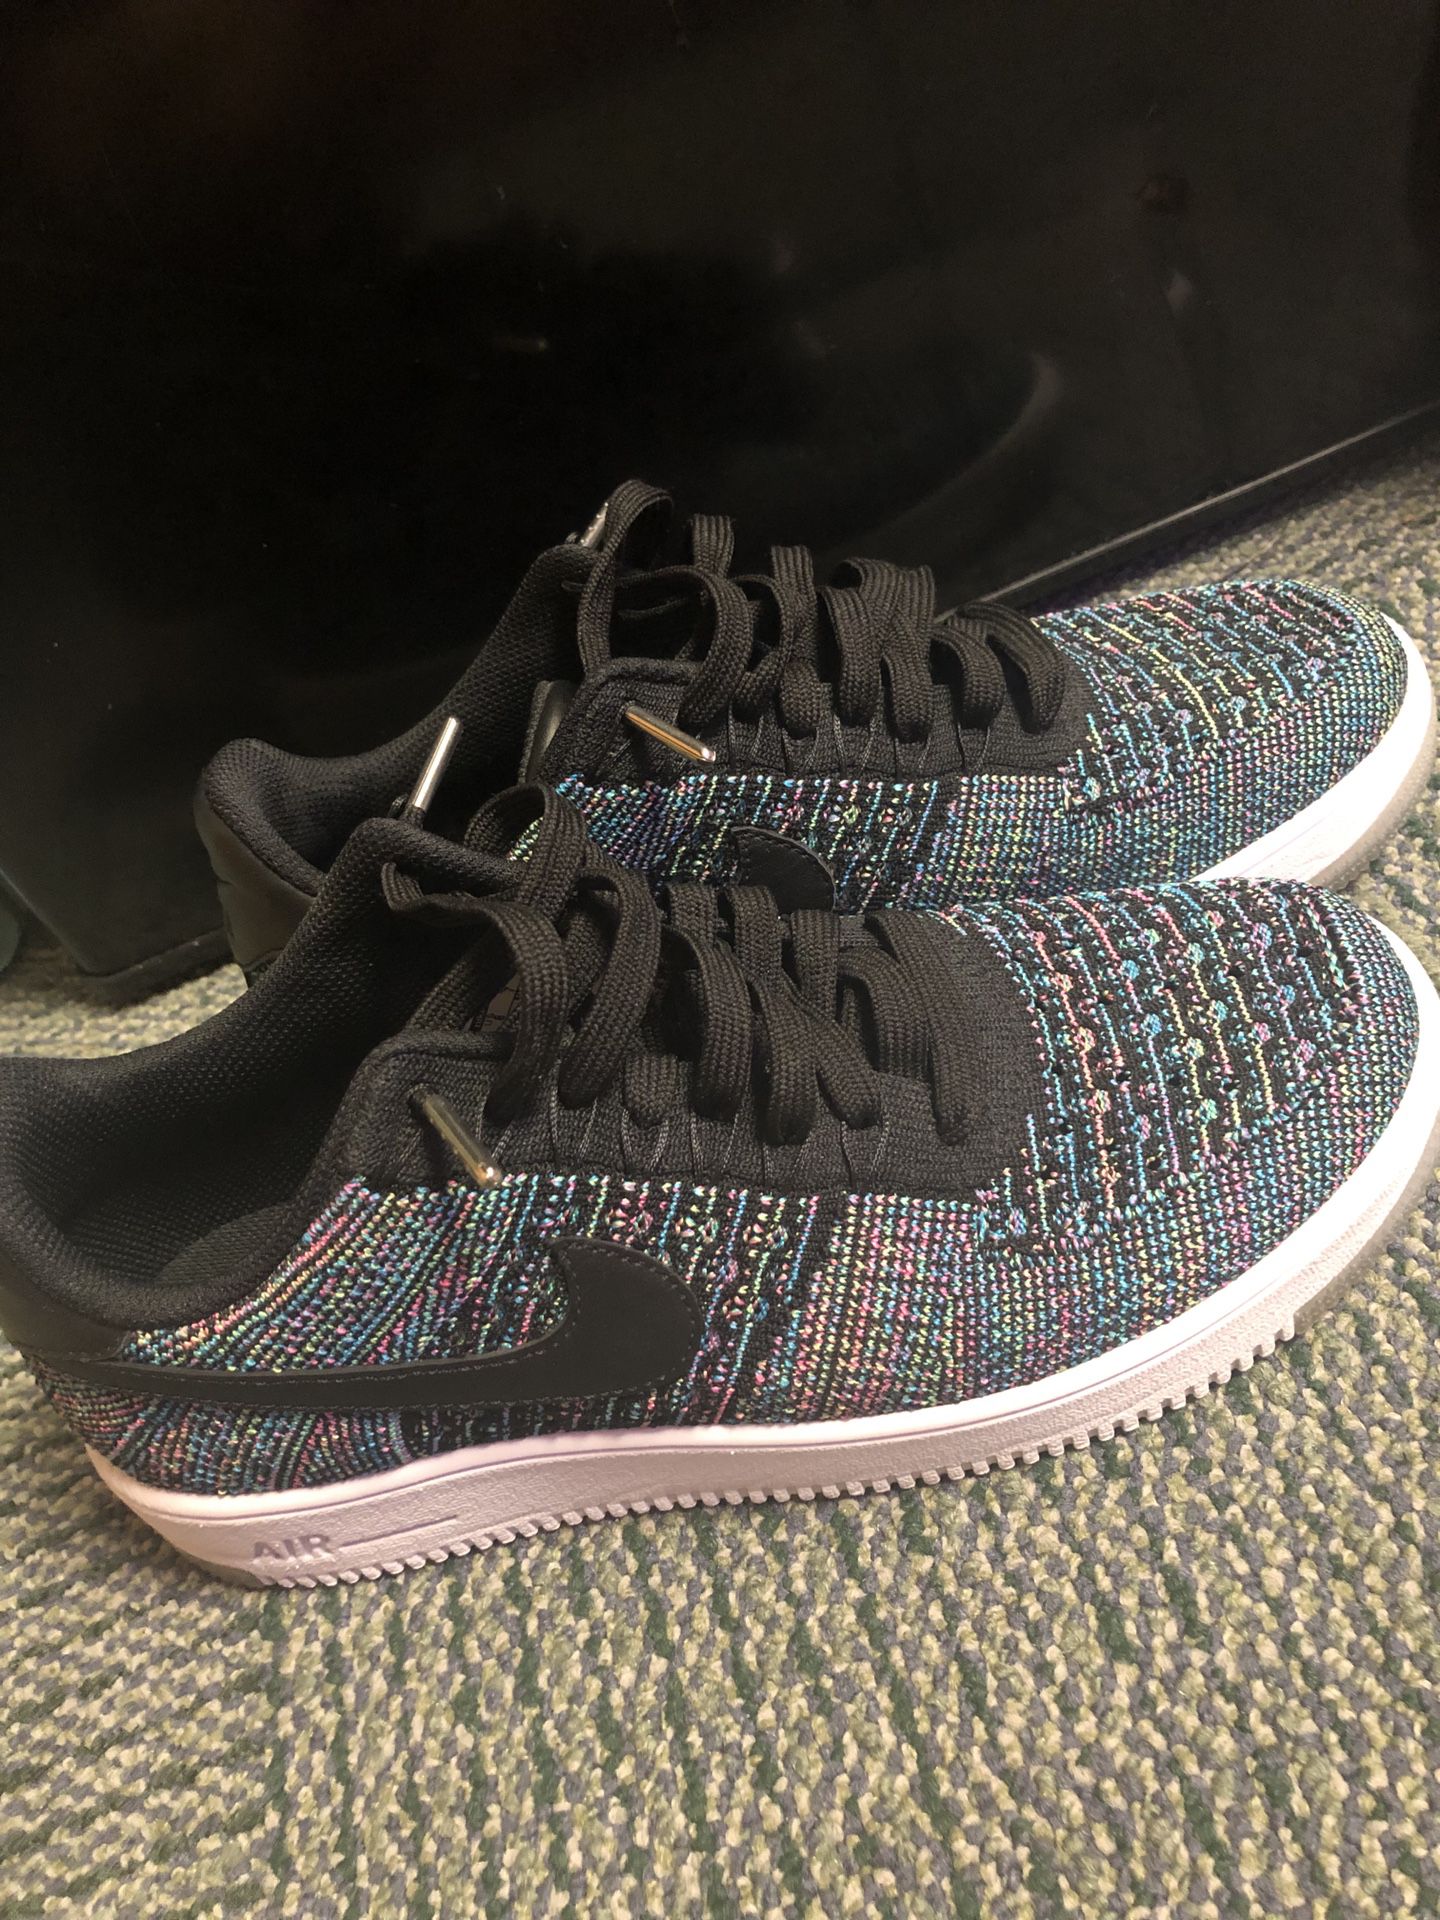 Air Force 1 Flyknit